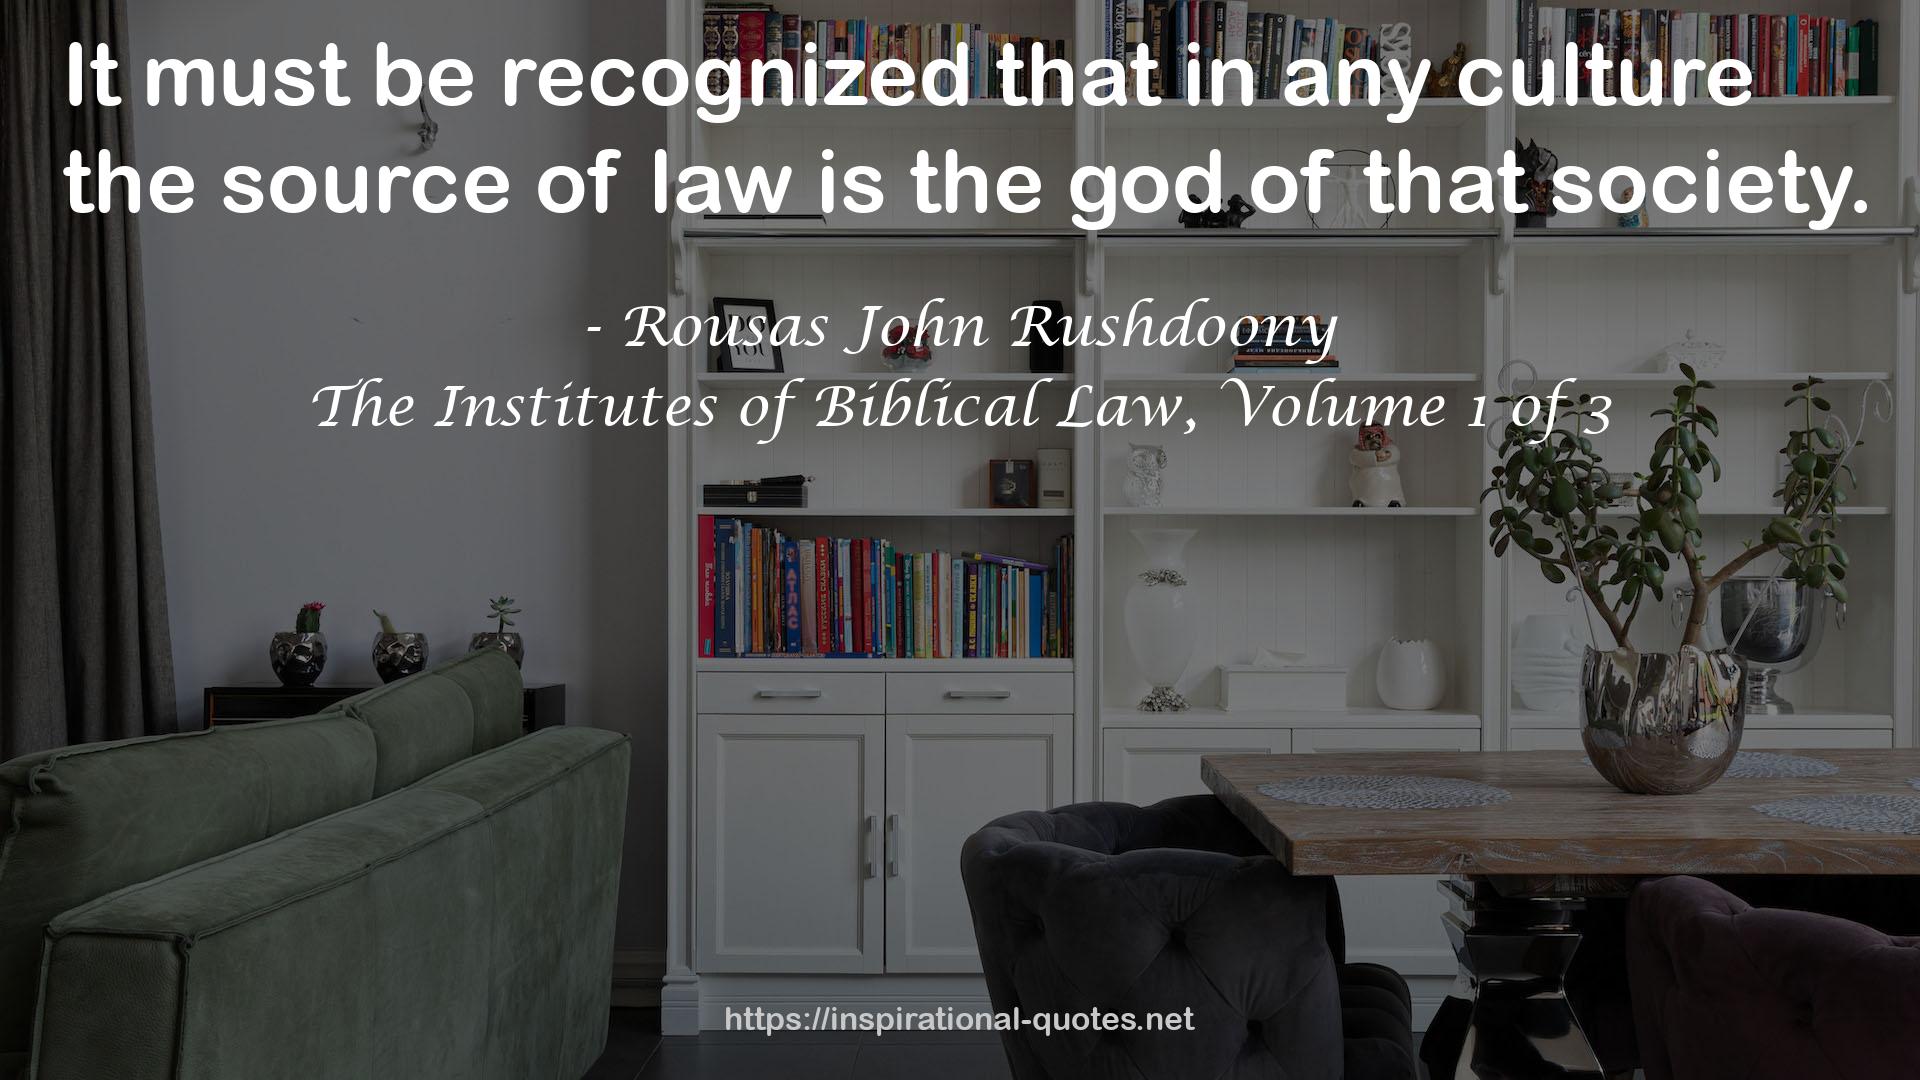 The Institutes of Biblical Law, Volume 1 of 3 QUOTES